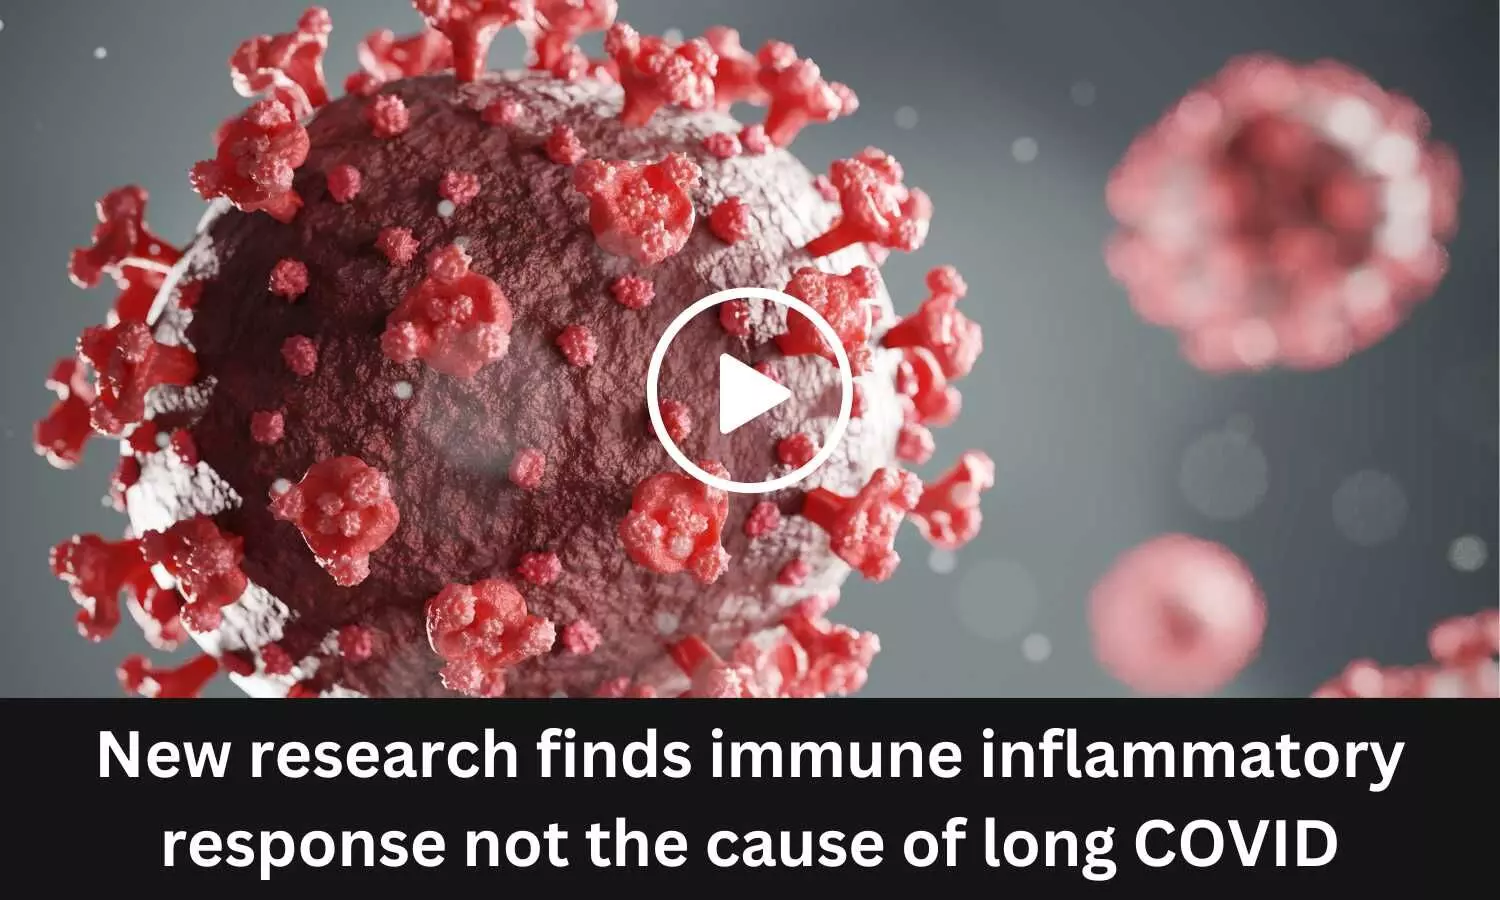 New research finds immune inflammatory response not the cause of long COVID